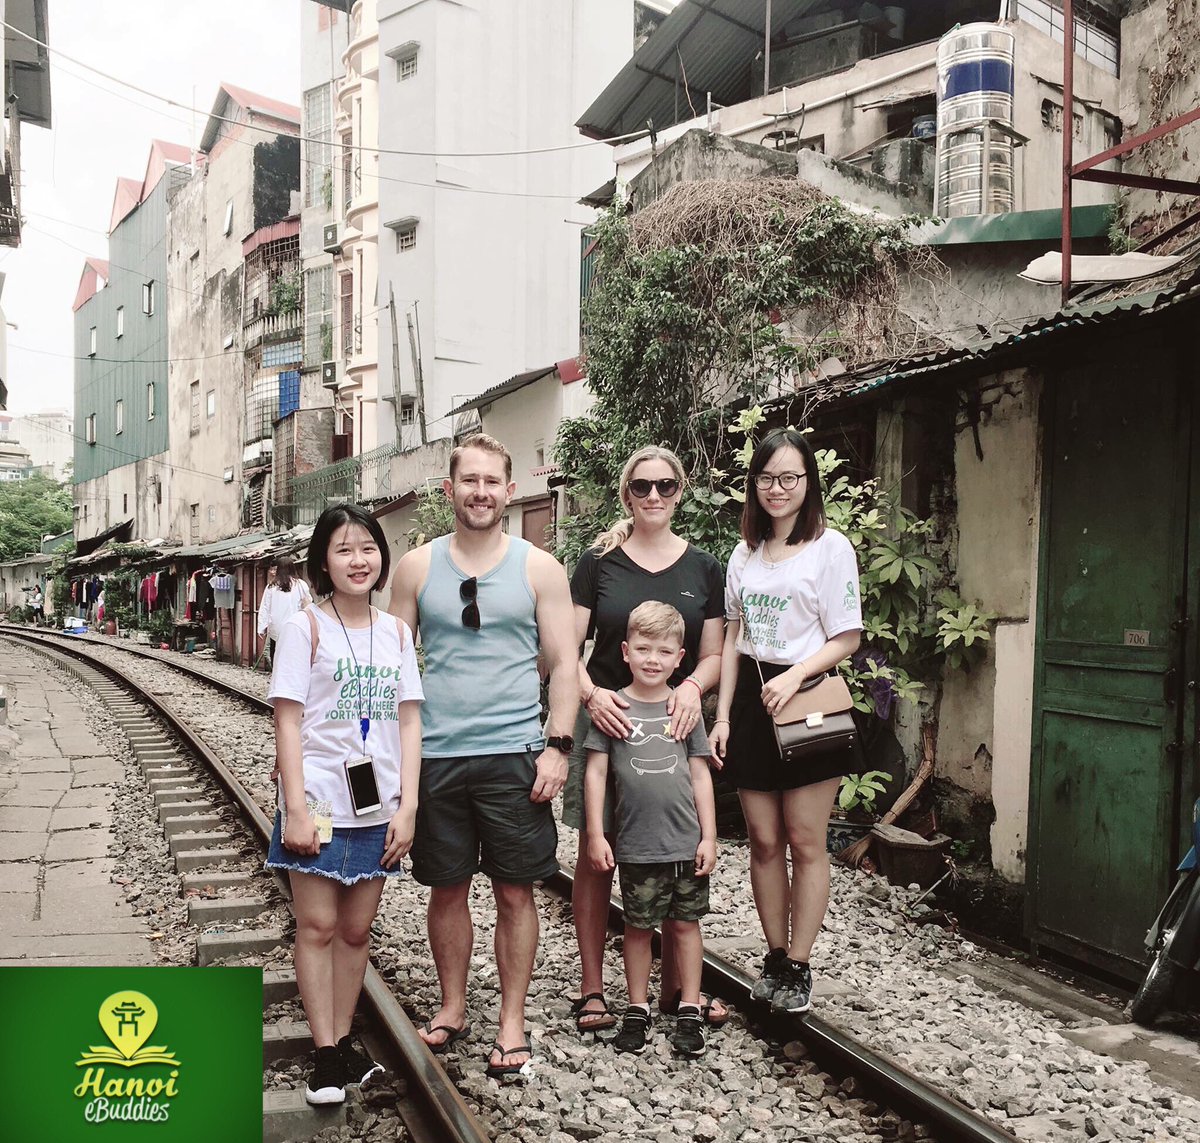 ーTour with New Zealanders🇳🇿ー

'It's not where you go, it's who you travel with'. Our #studentguide will be your best buddy helping you when you visit #Hanoi #Vietnam🤗
#Hanoiebuddies #travel #studenttourguide #freetour #follo4follo #photos #like4like #localguide #vietnamcharm